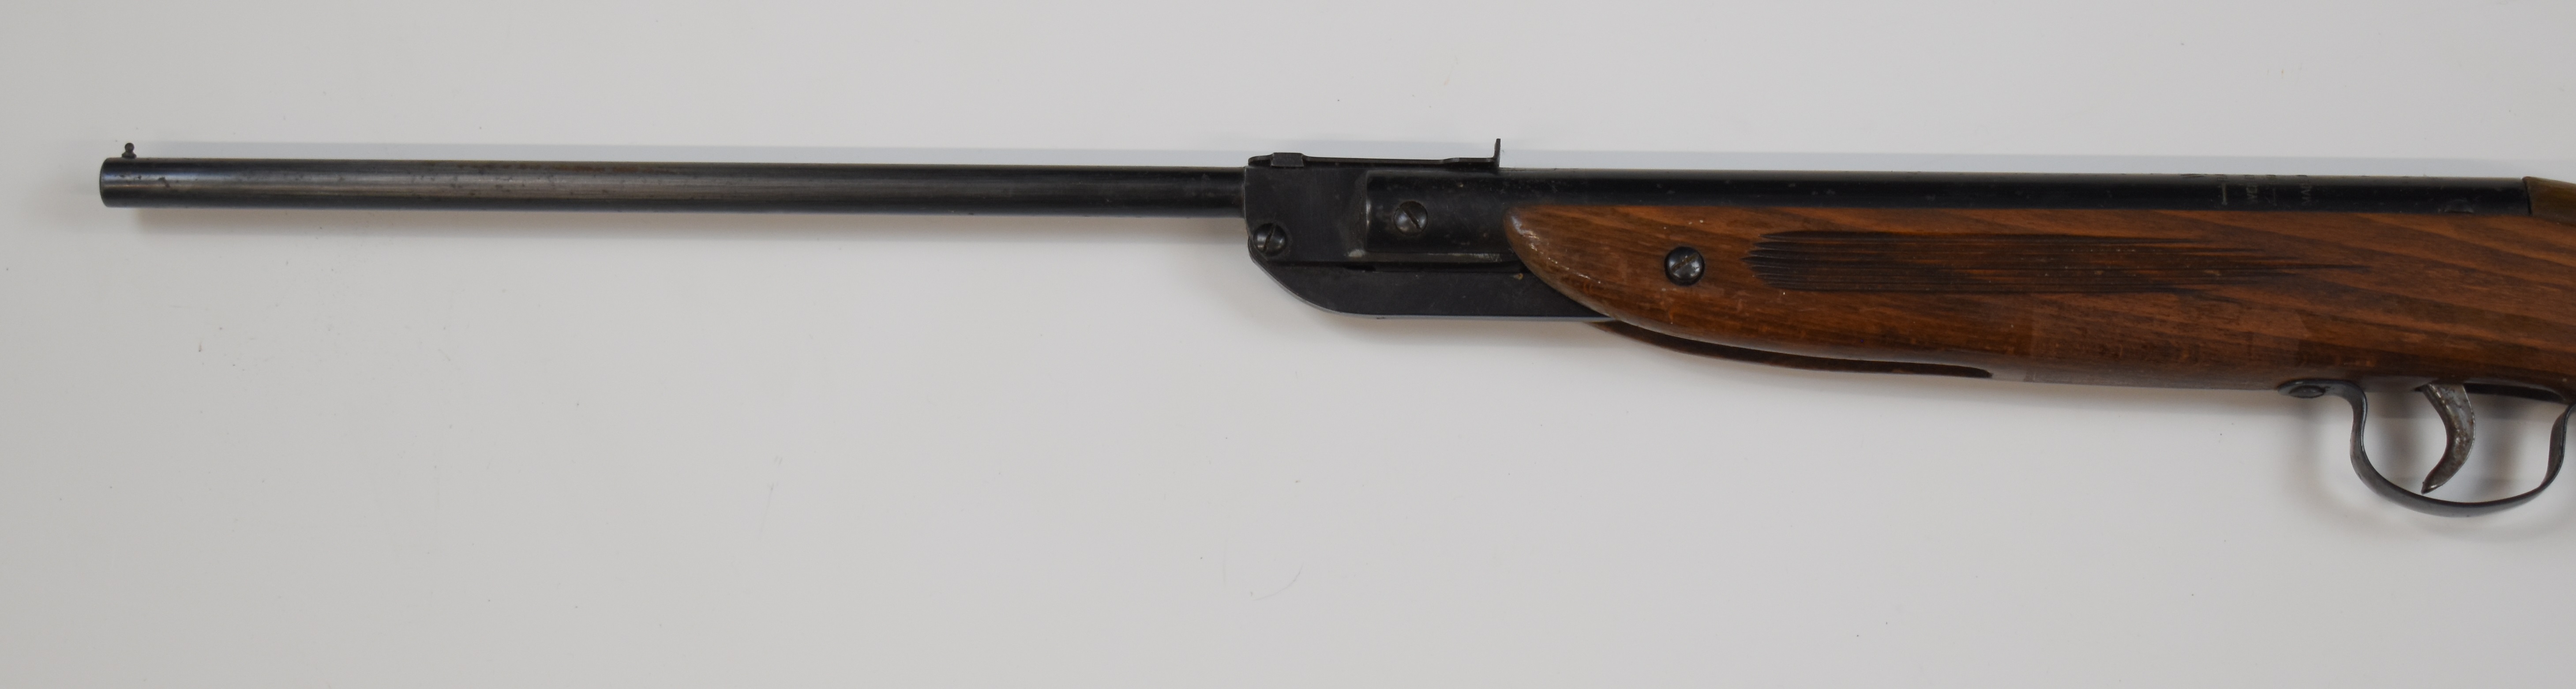 Webley Ranger .177 air rifle with semi-pistol grip and adjustable sights, NVSN, in original box. - Image 8 of 8